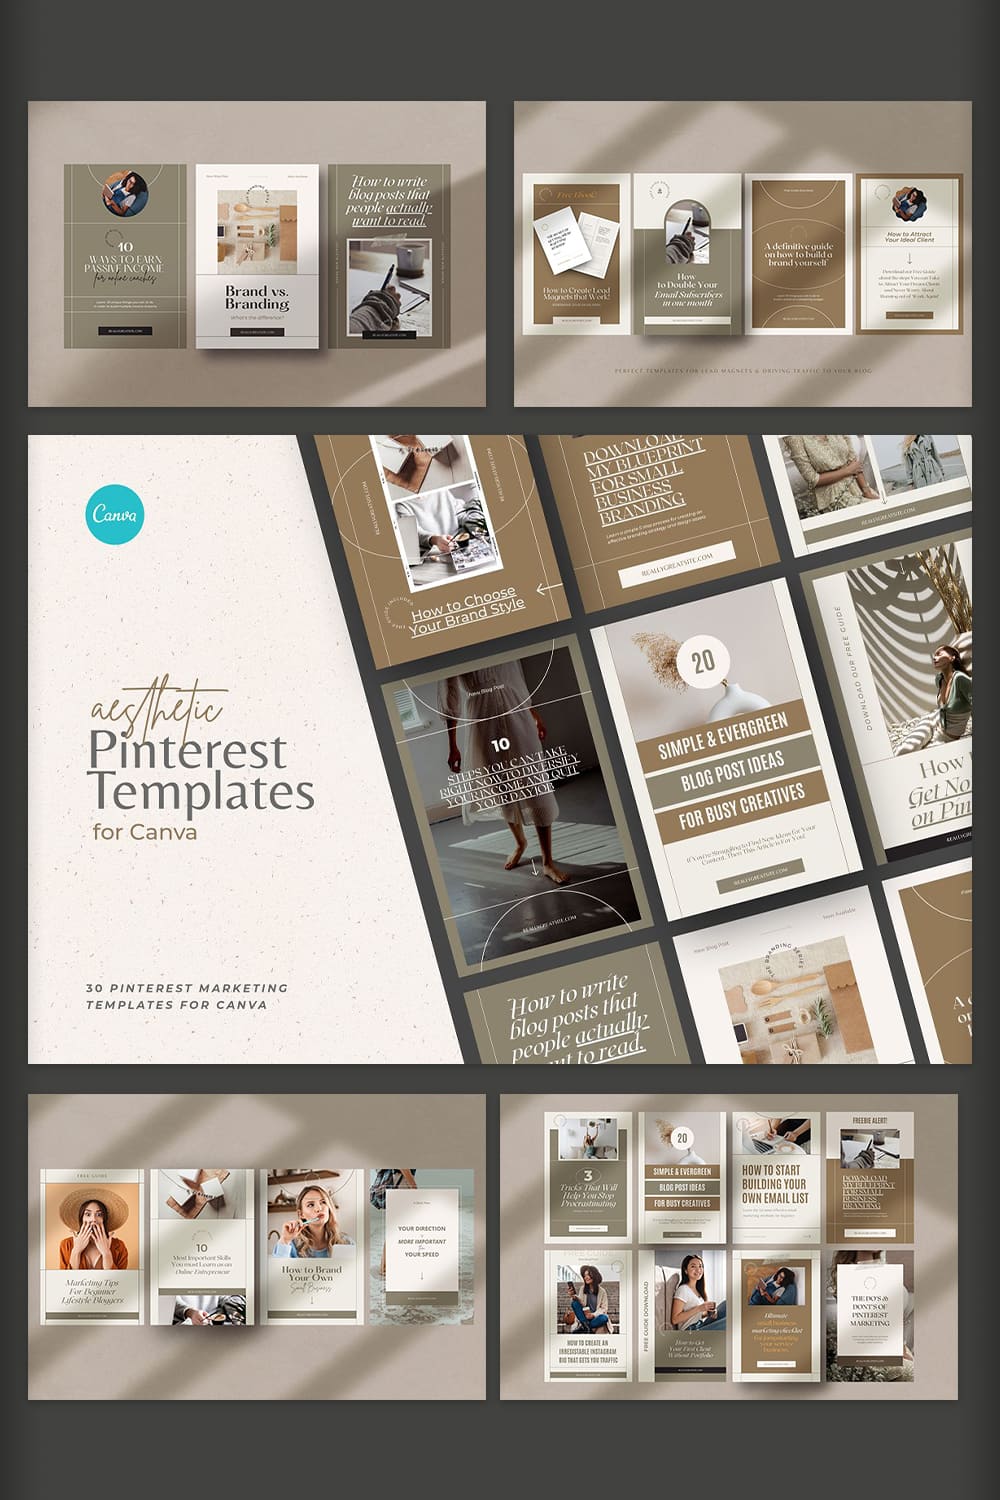 Aesthetic Pinterest Templates For Canva - "How To Choose Your Brand Style".